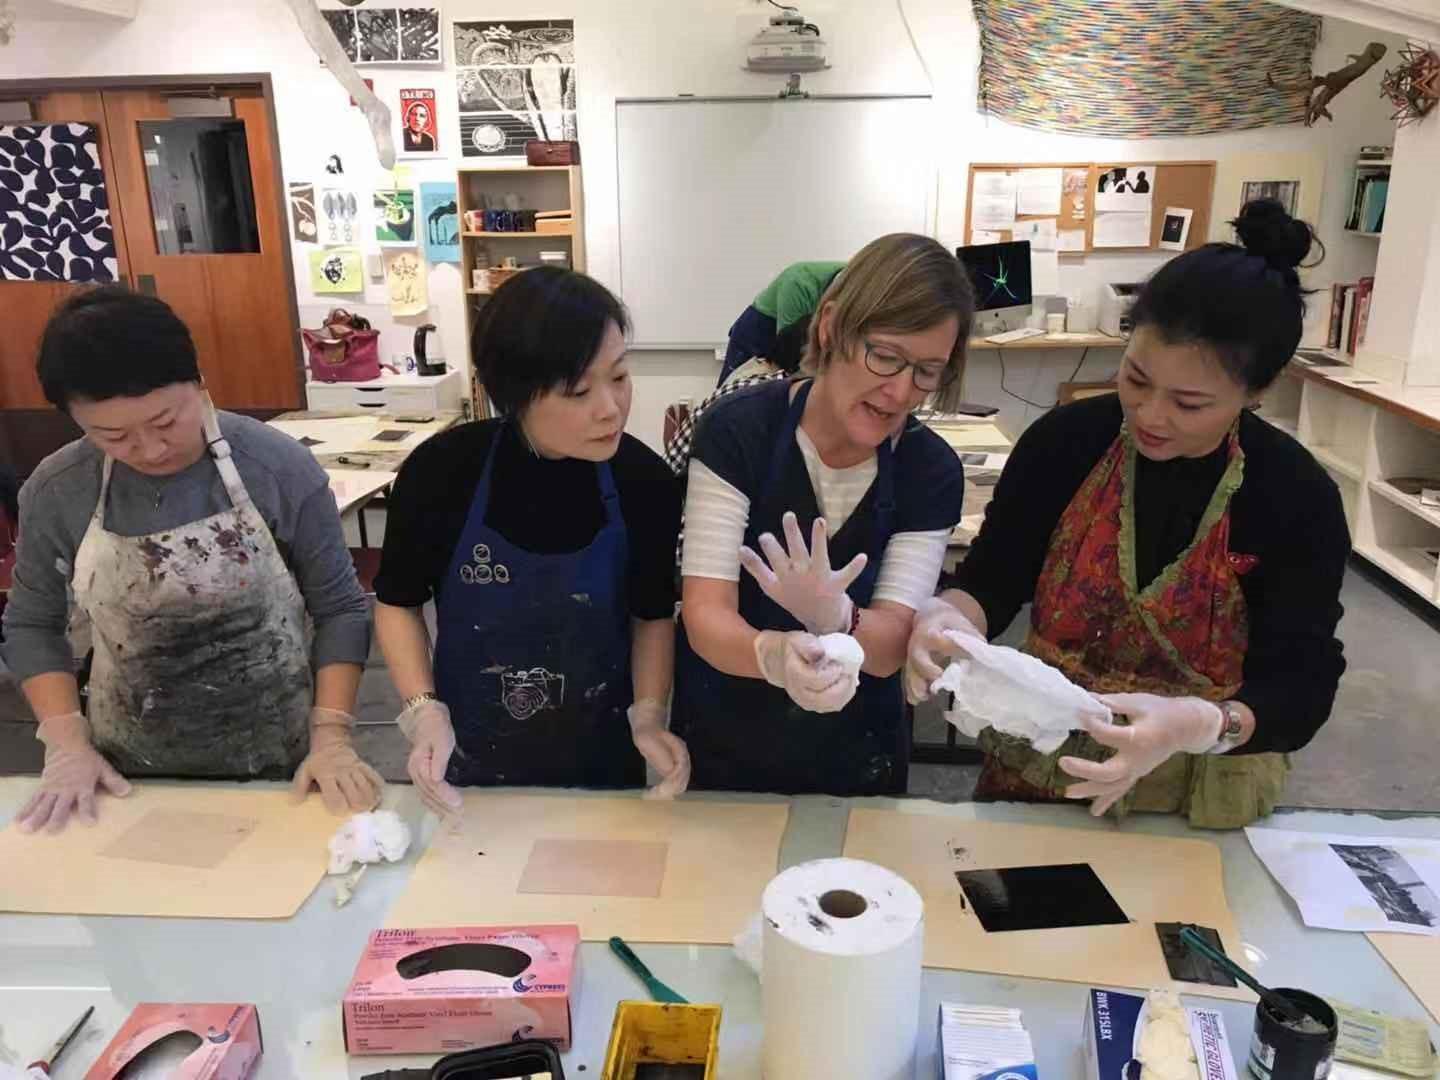 "The Visiting Scholars team wears paint-stained aprons as they work on art project at ECA school.”